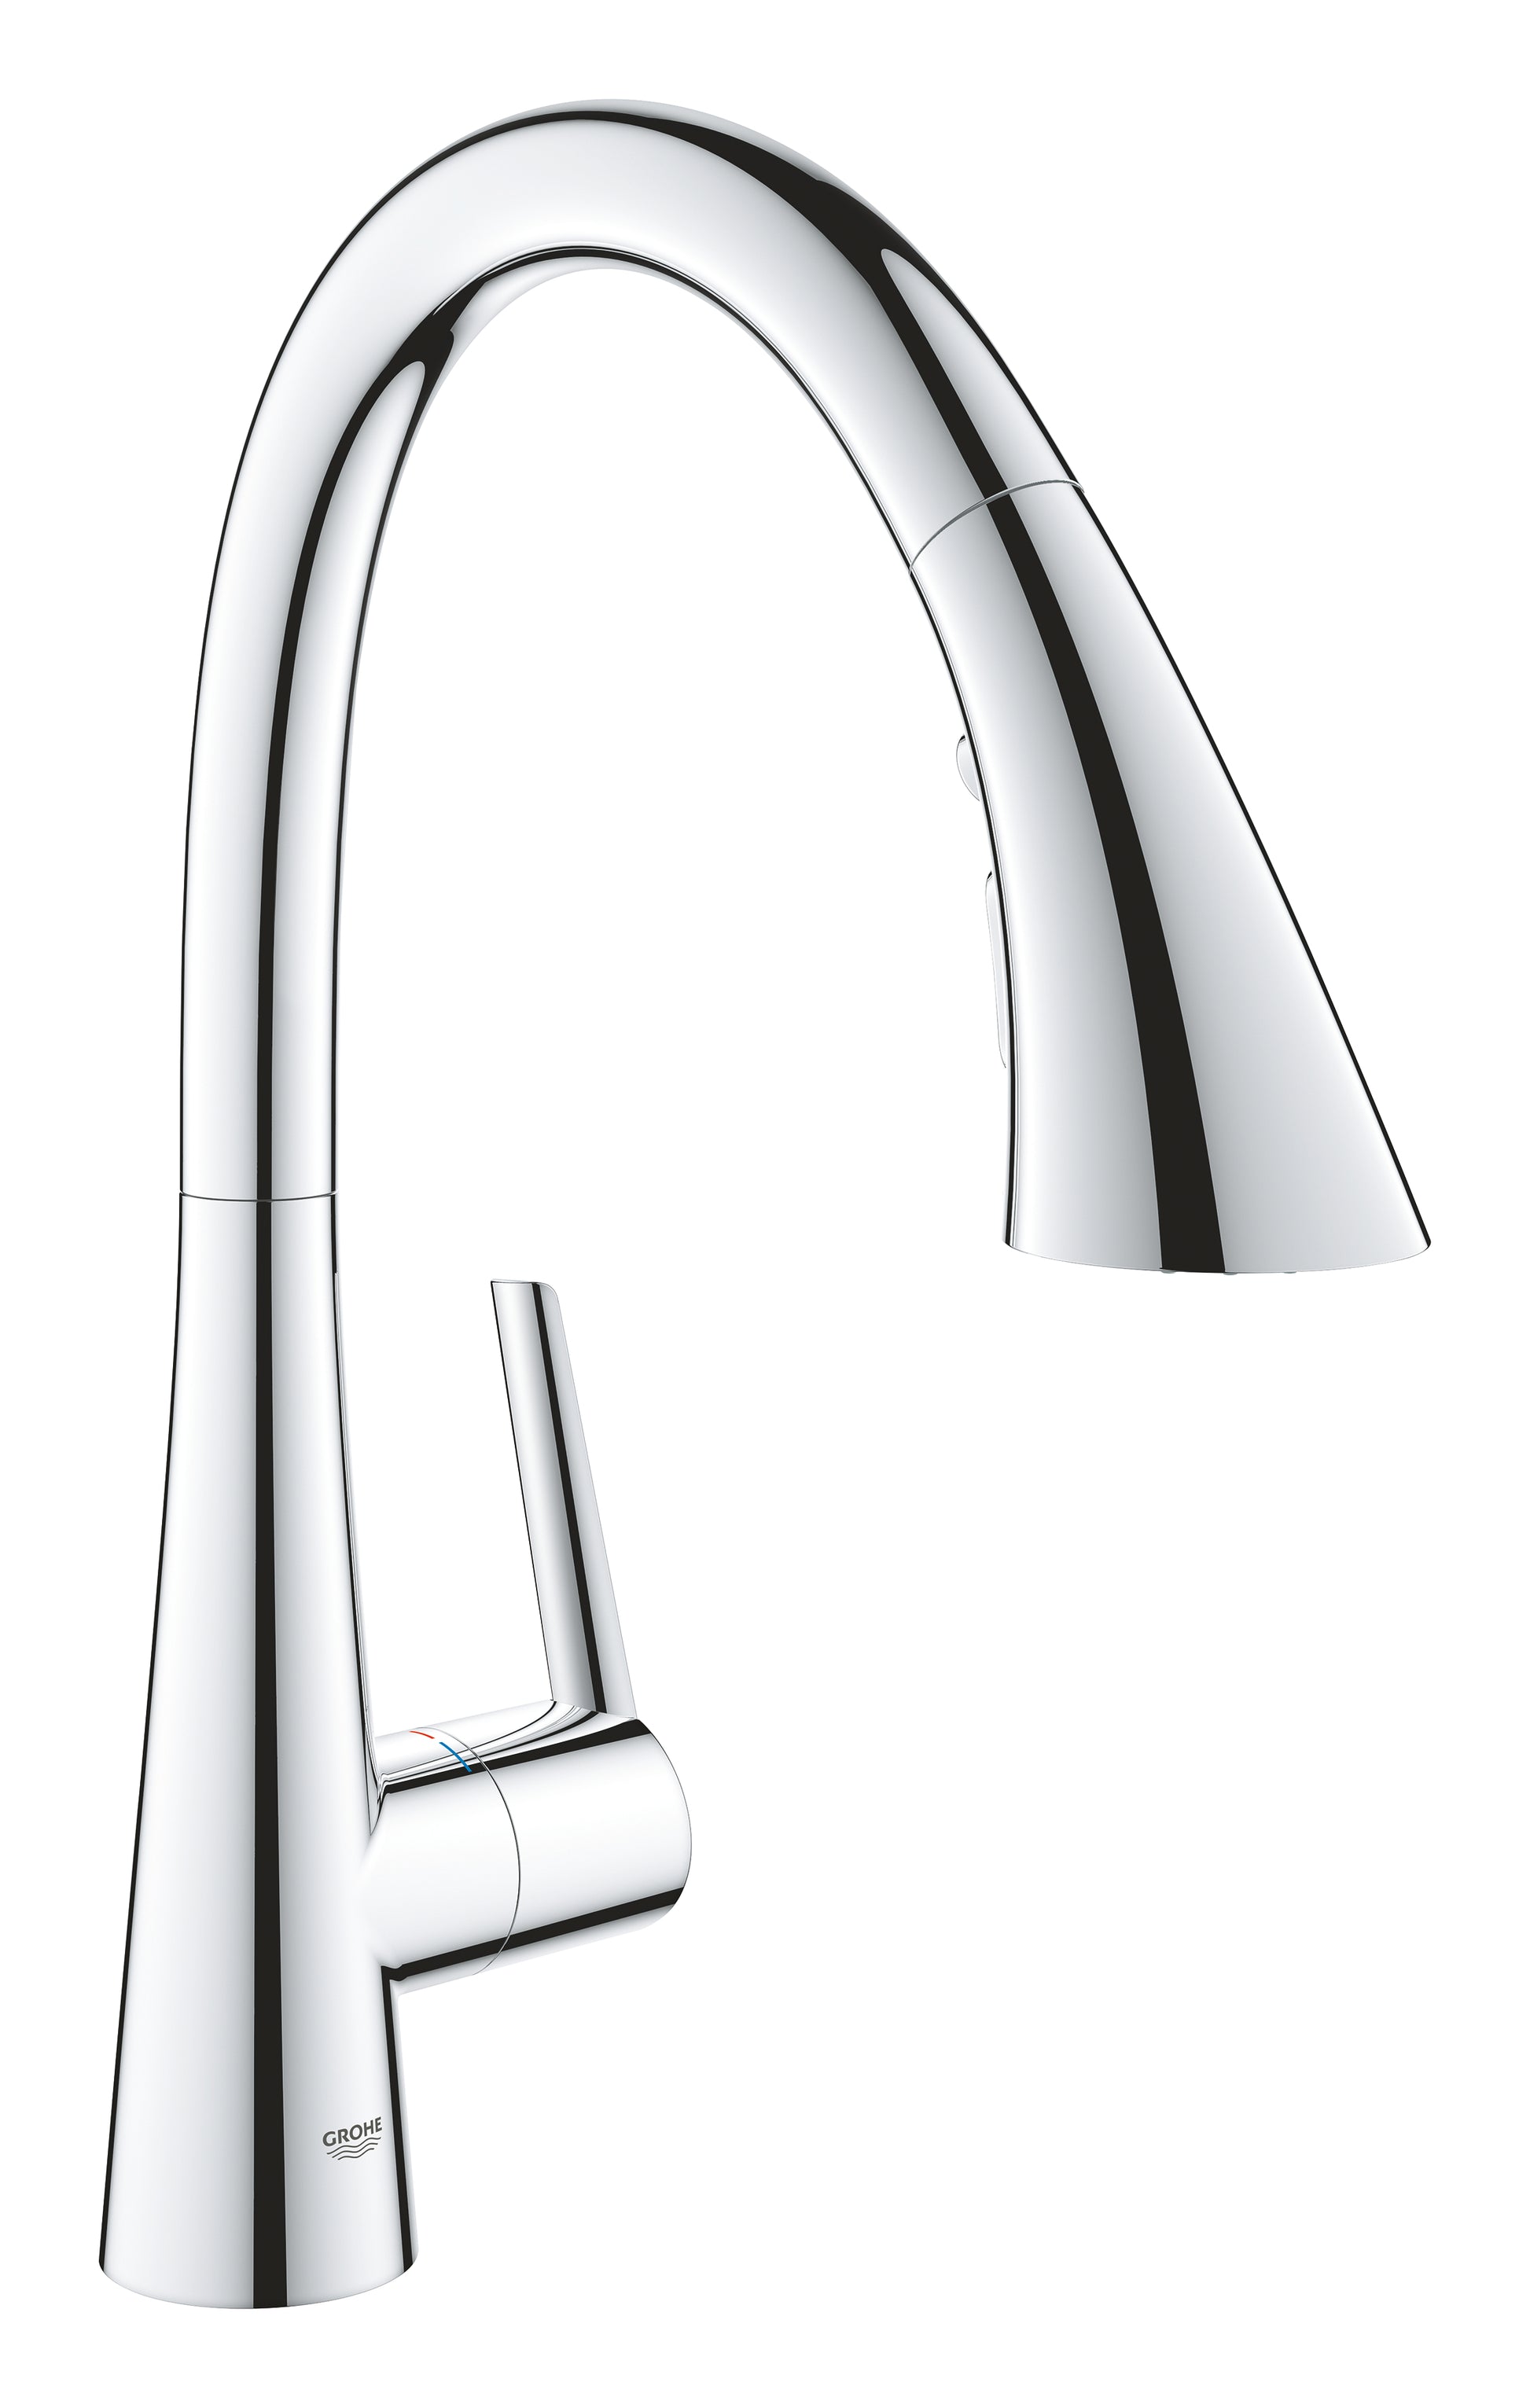 GROHE 32298003 Grohe Zedra Chrome Single-Handle Pull Down Kitchen Faucet Triple Spray 1.75 GPM